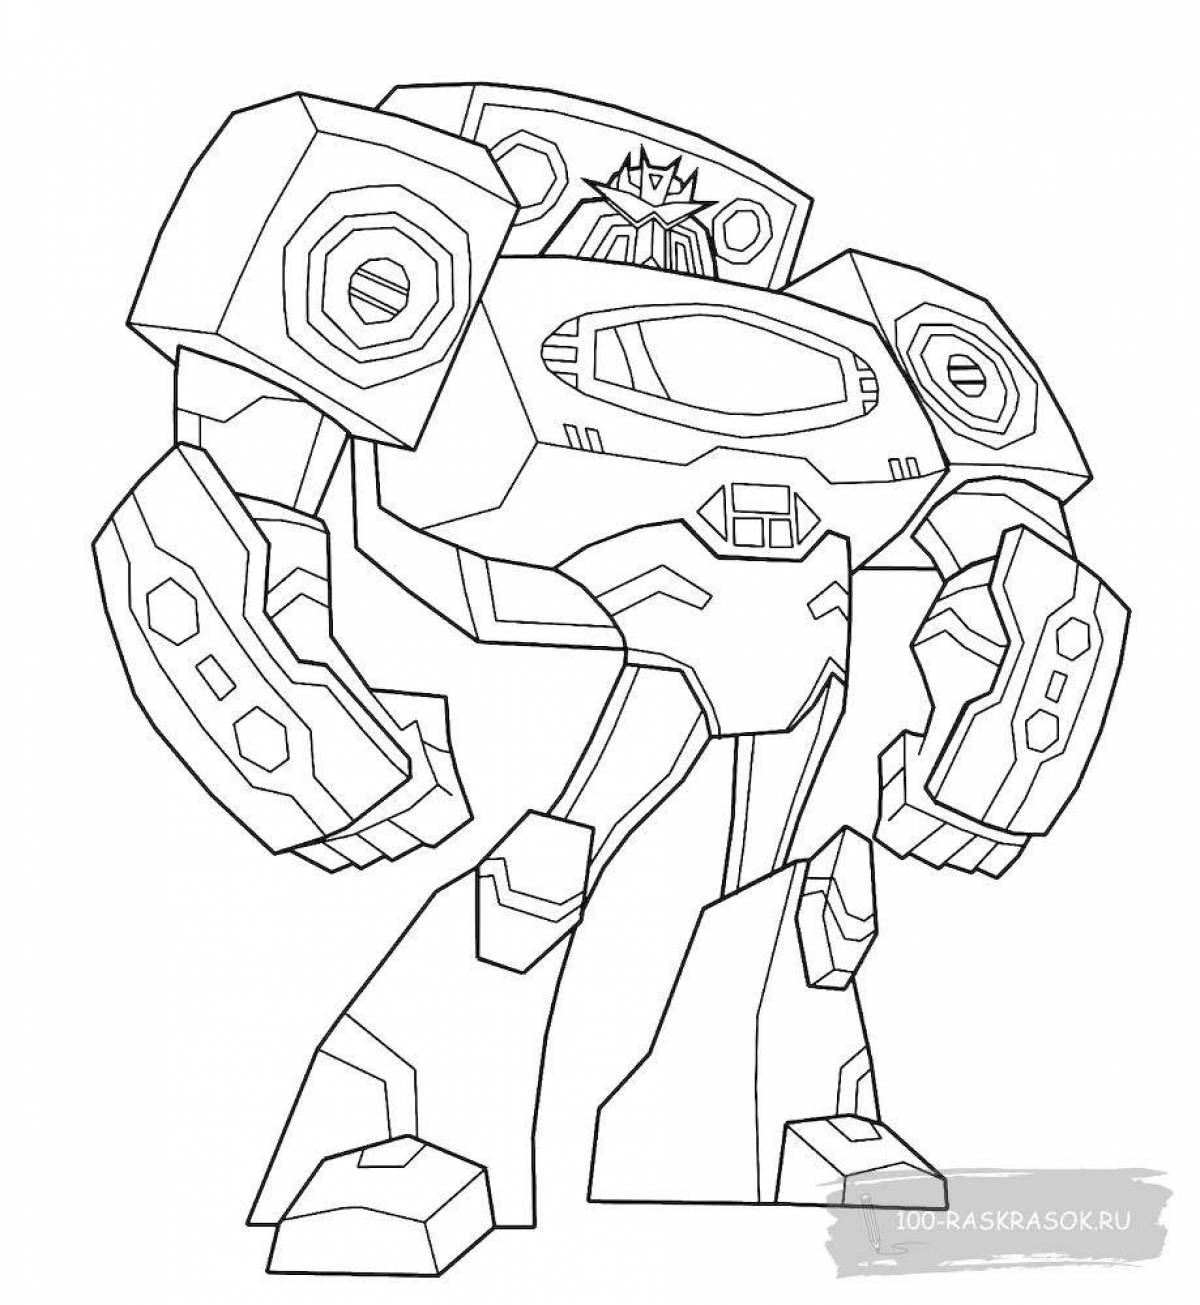 Coloring pages transformers for boys